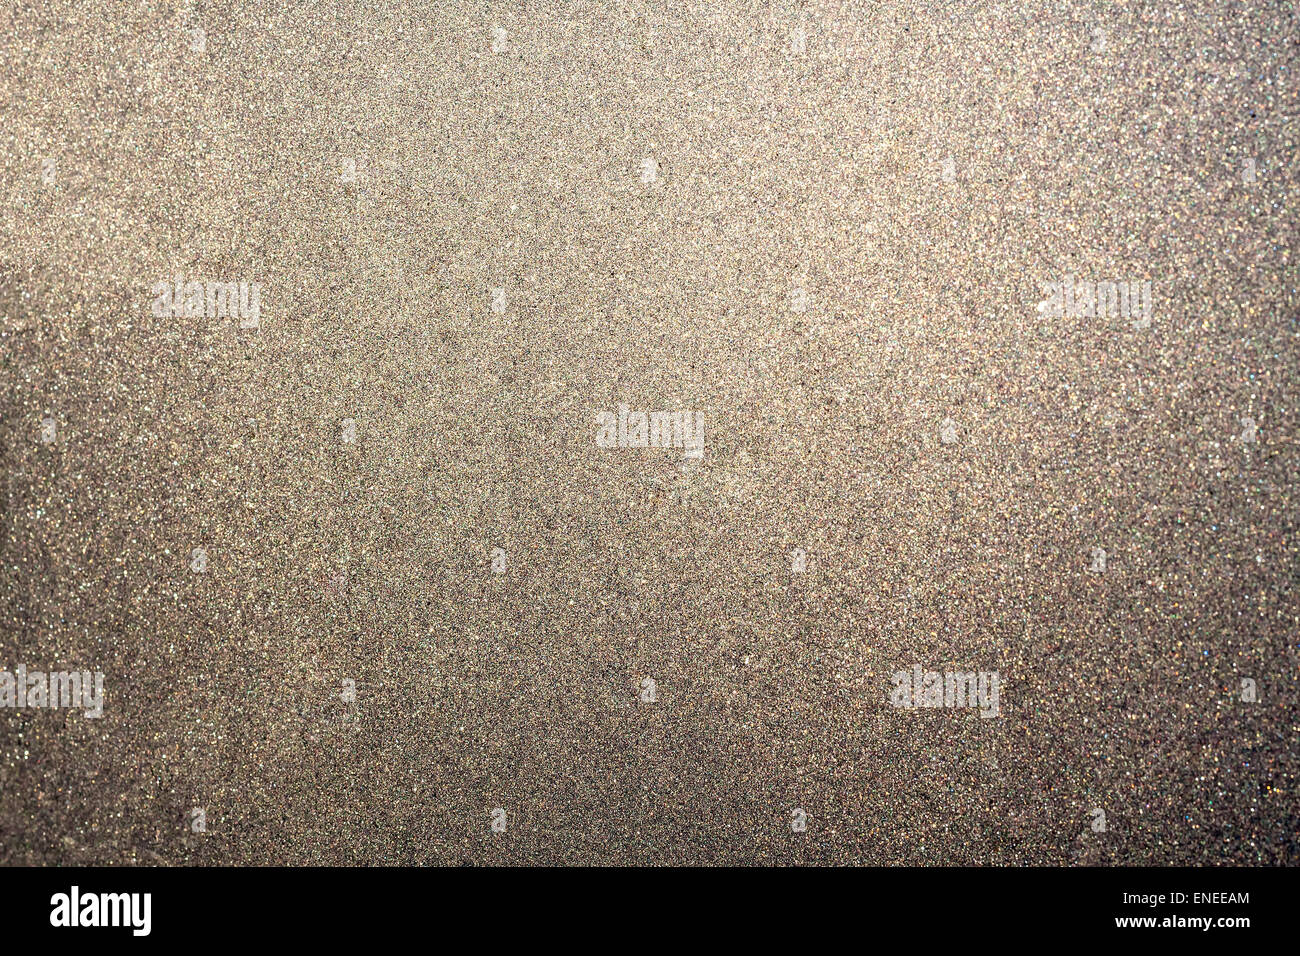 Abstract glittering platinum or brown dust or sand background with blur edges of image Stock Photo